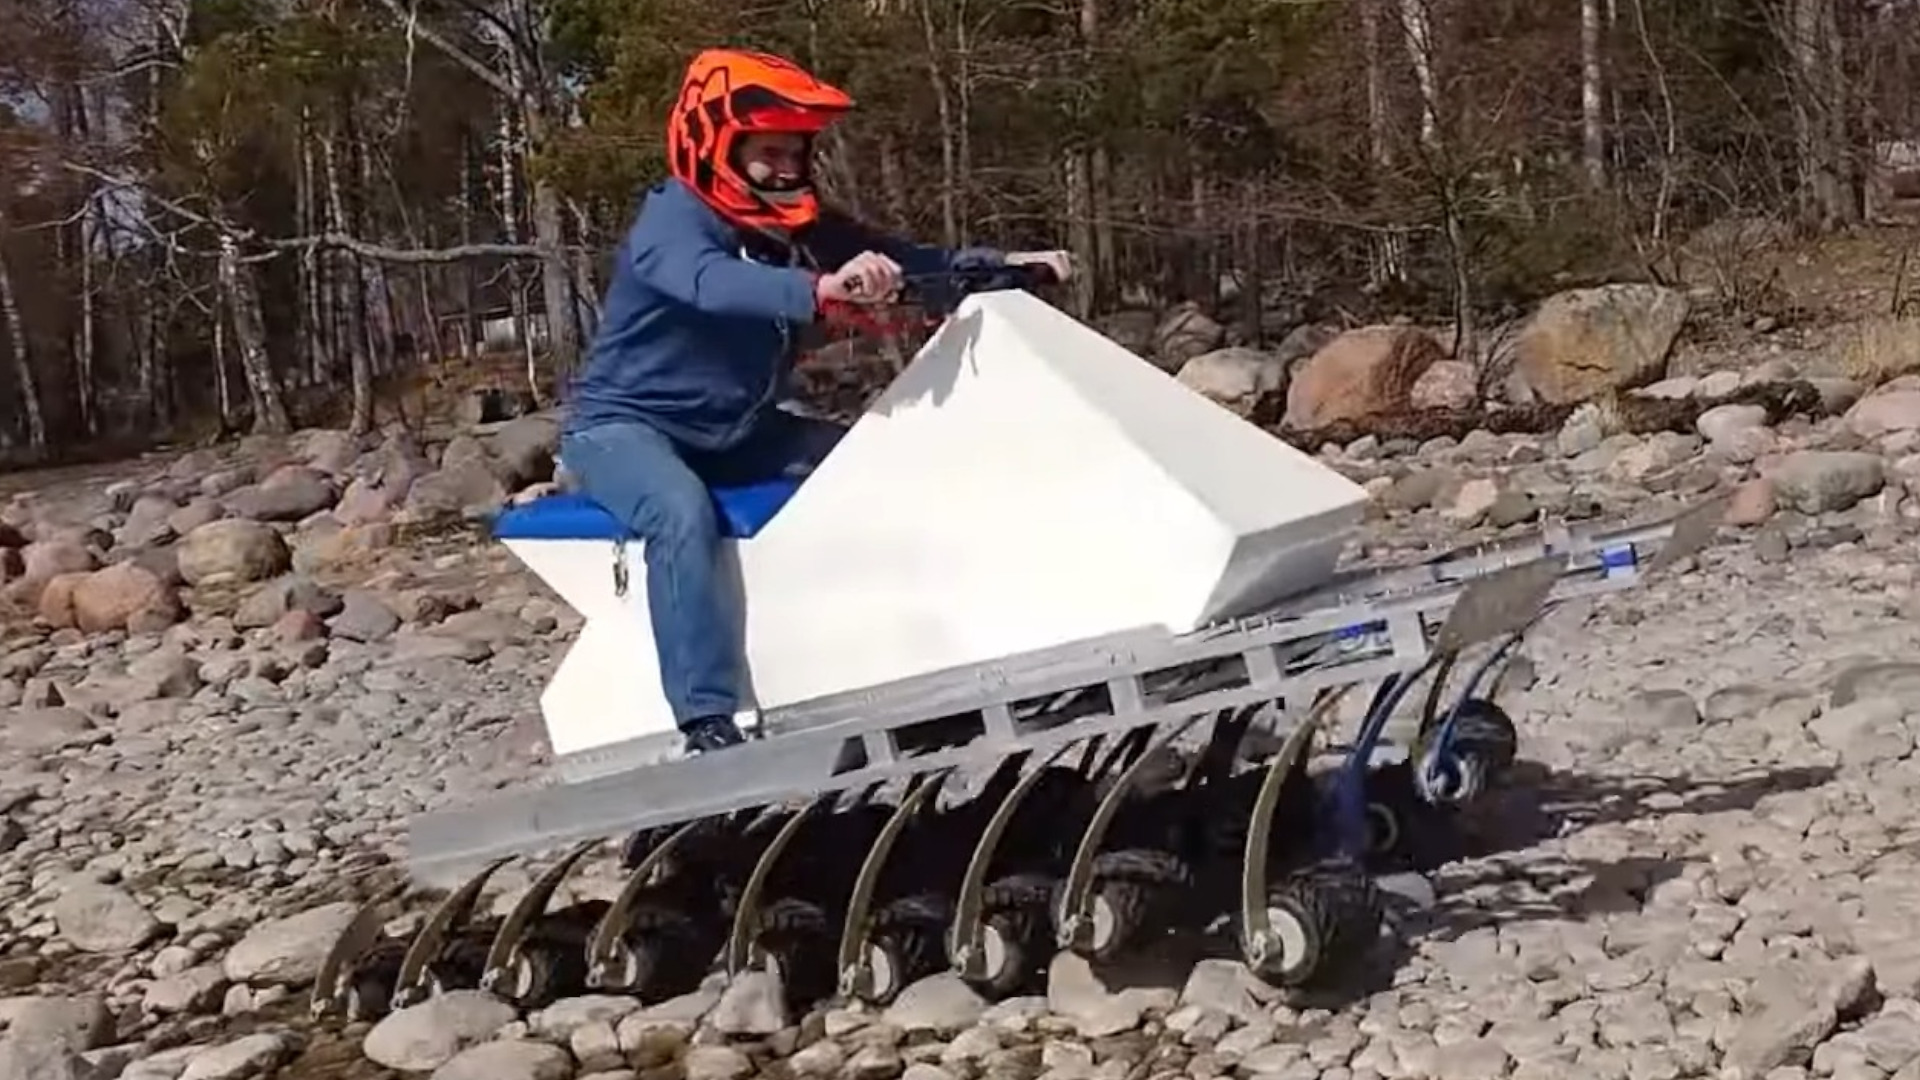 This Bizarre 18-Wheel ATV Is Borderline Unsettling to Watch